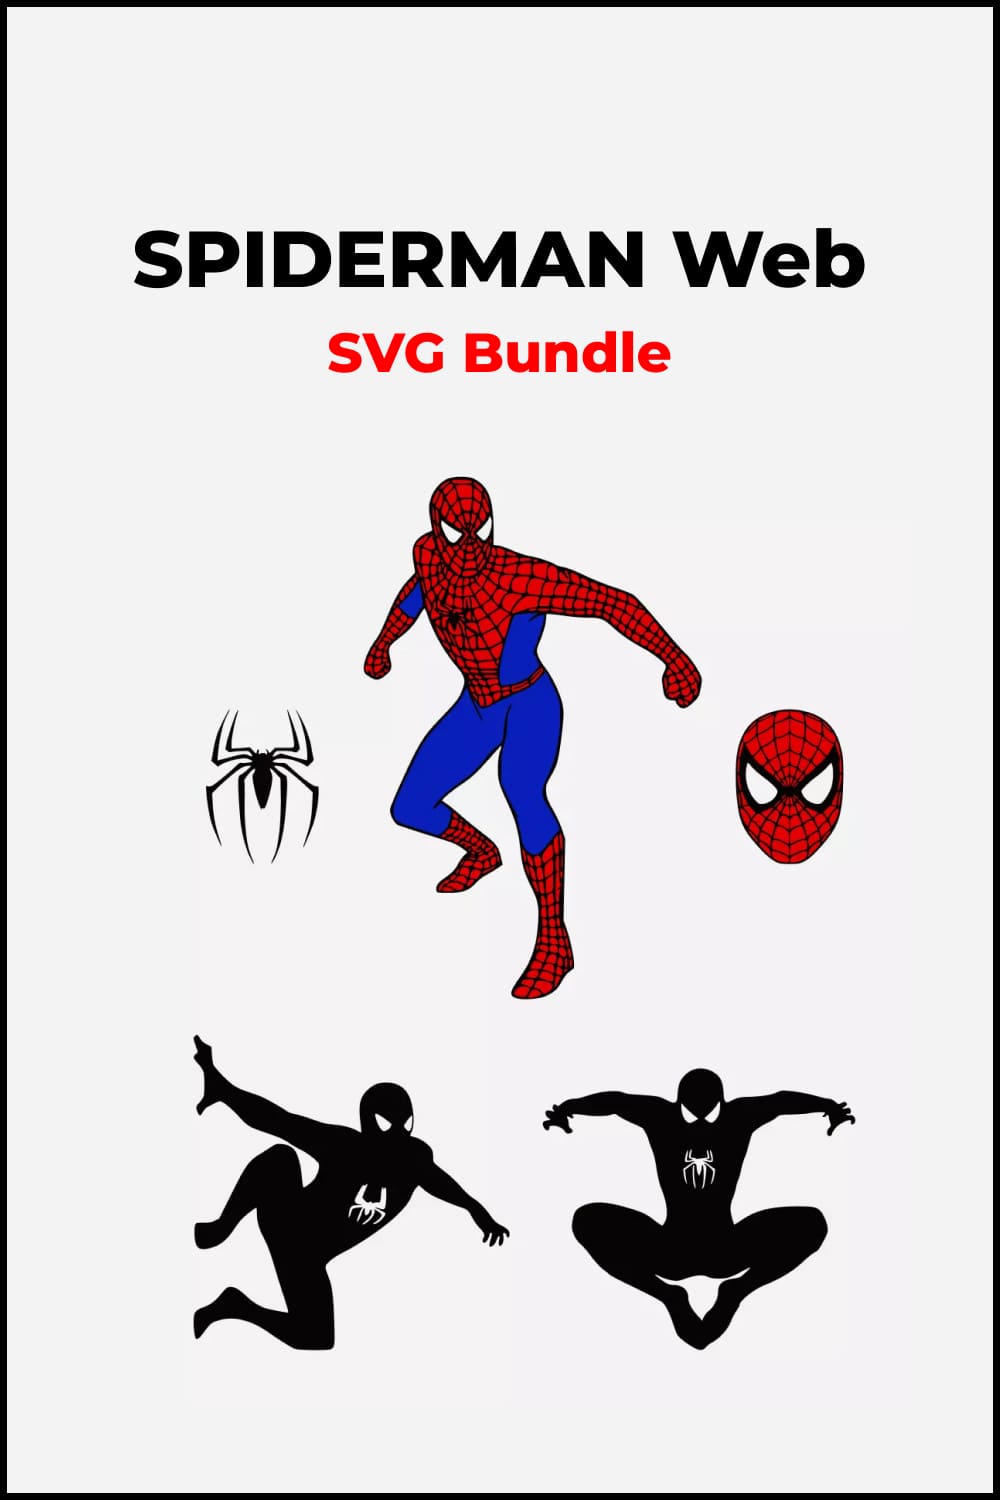 Images of Spiderman in color and in black white plus logo.